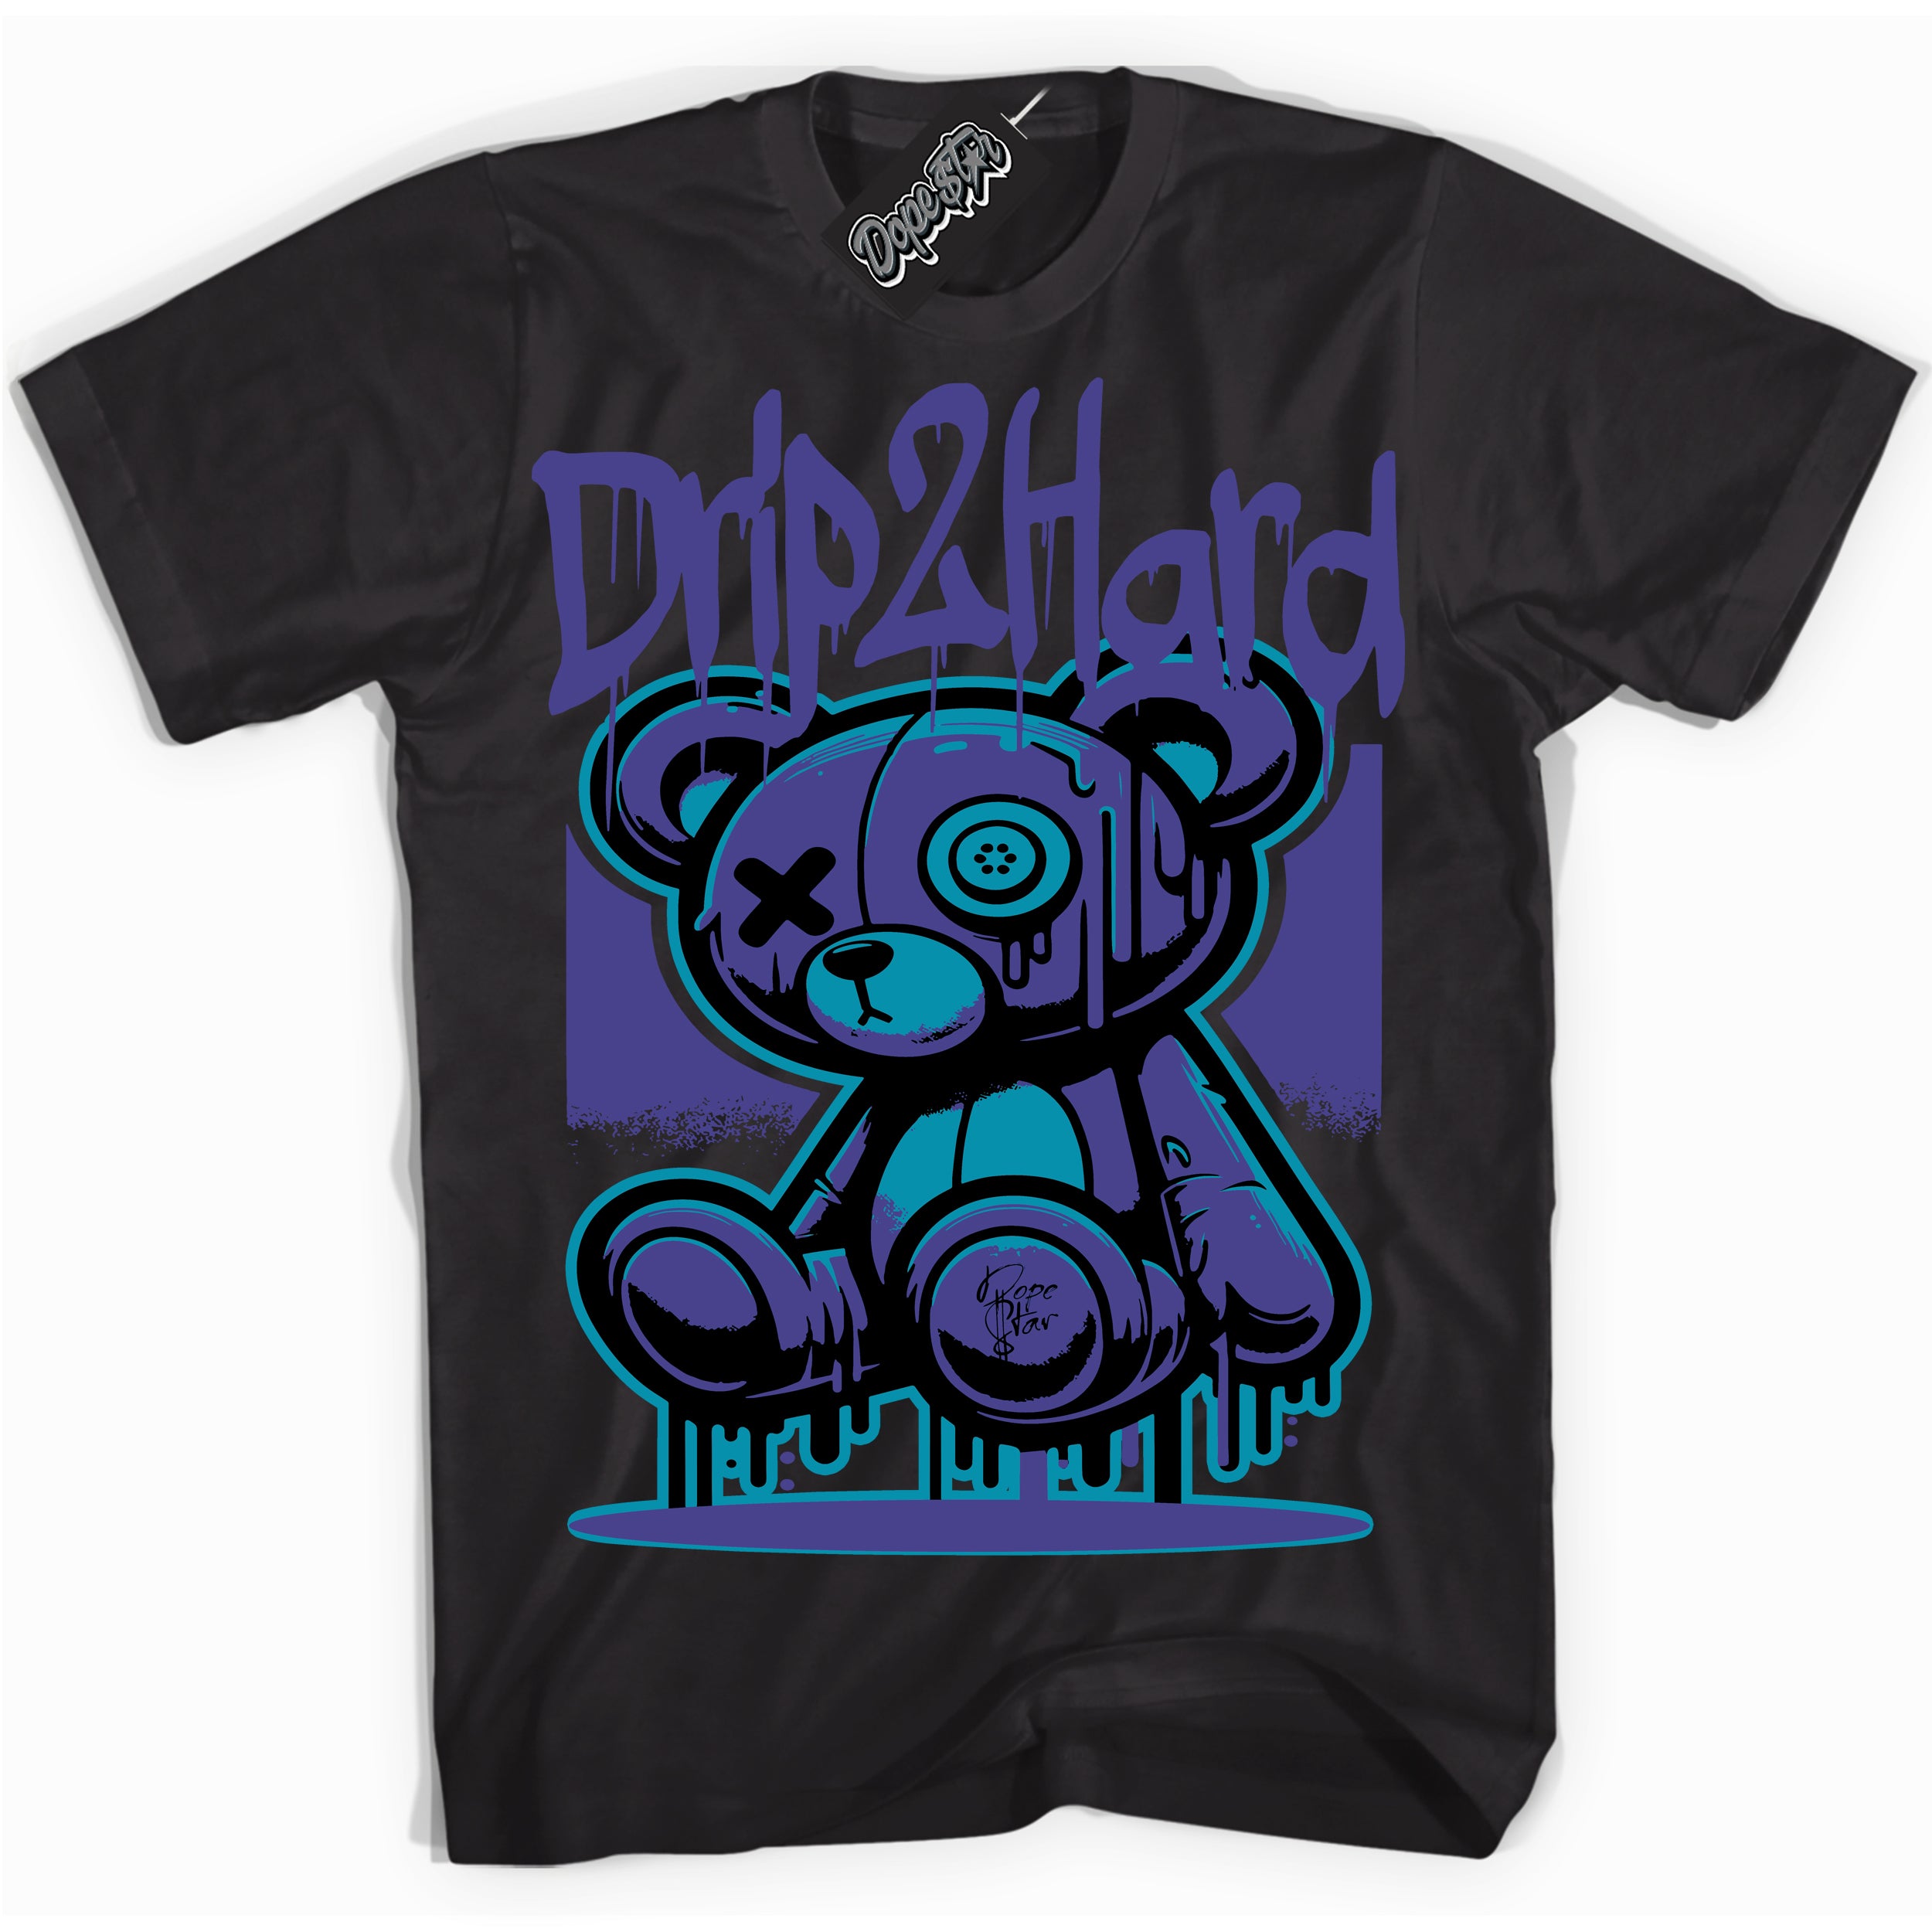 Cool Black graphic tee with “ Drip 2 Hard ” design, that perfectly matches Aqua 6s